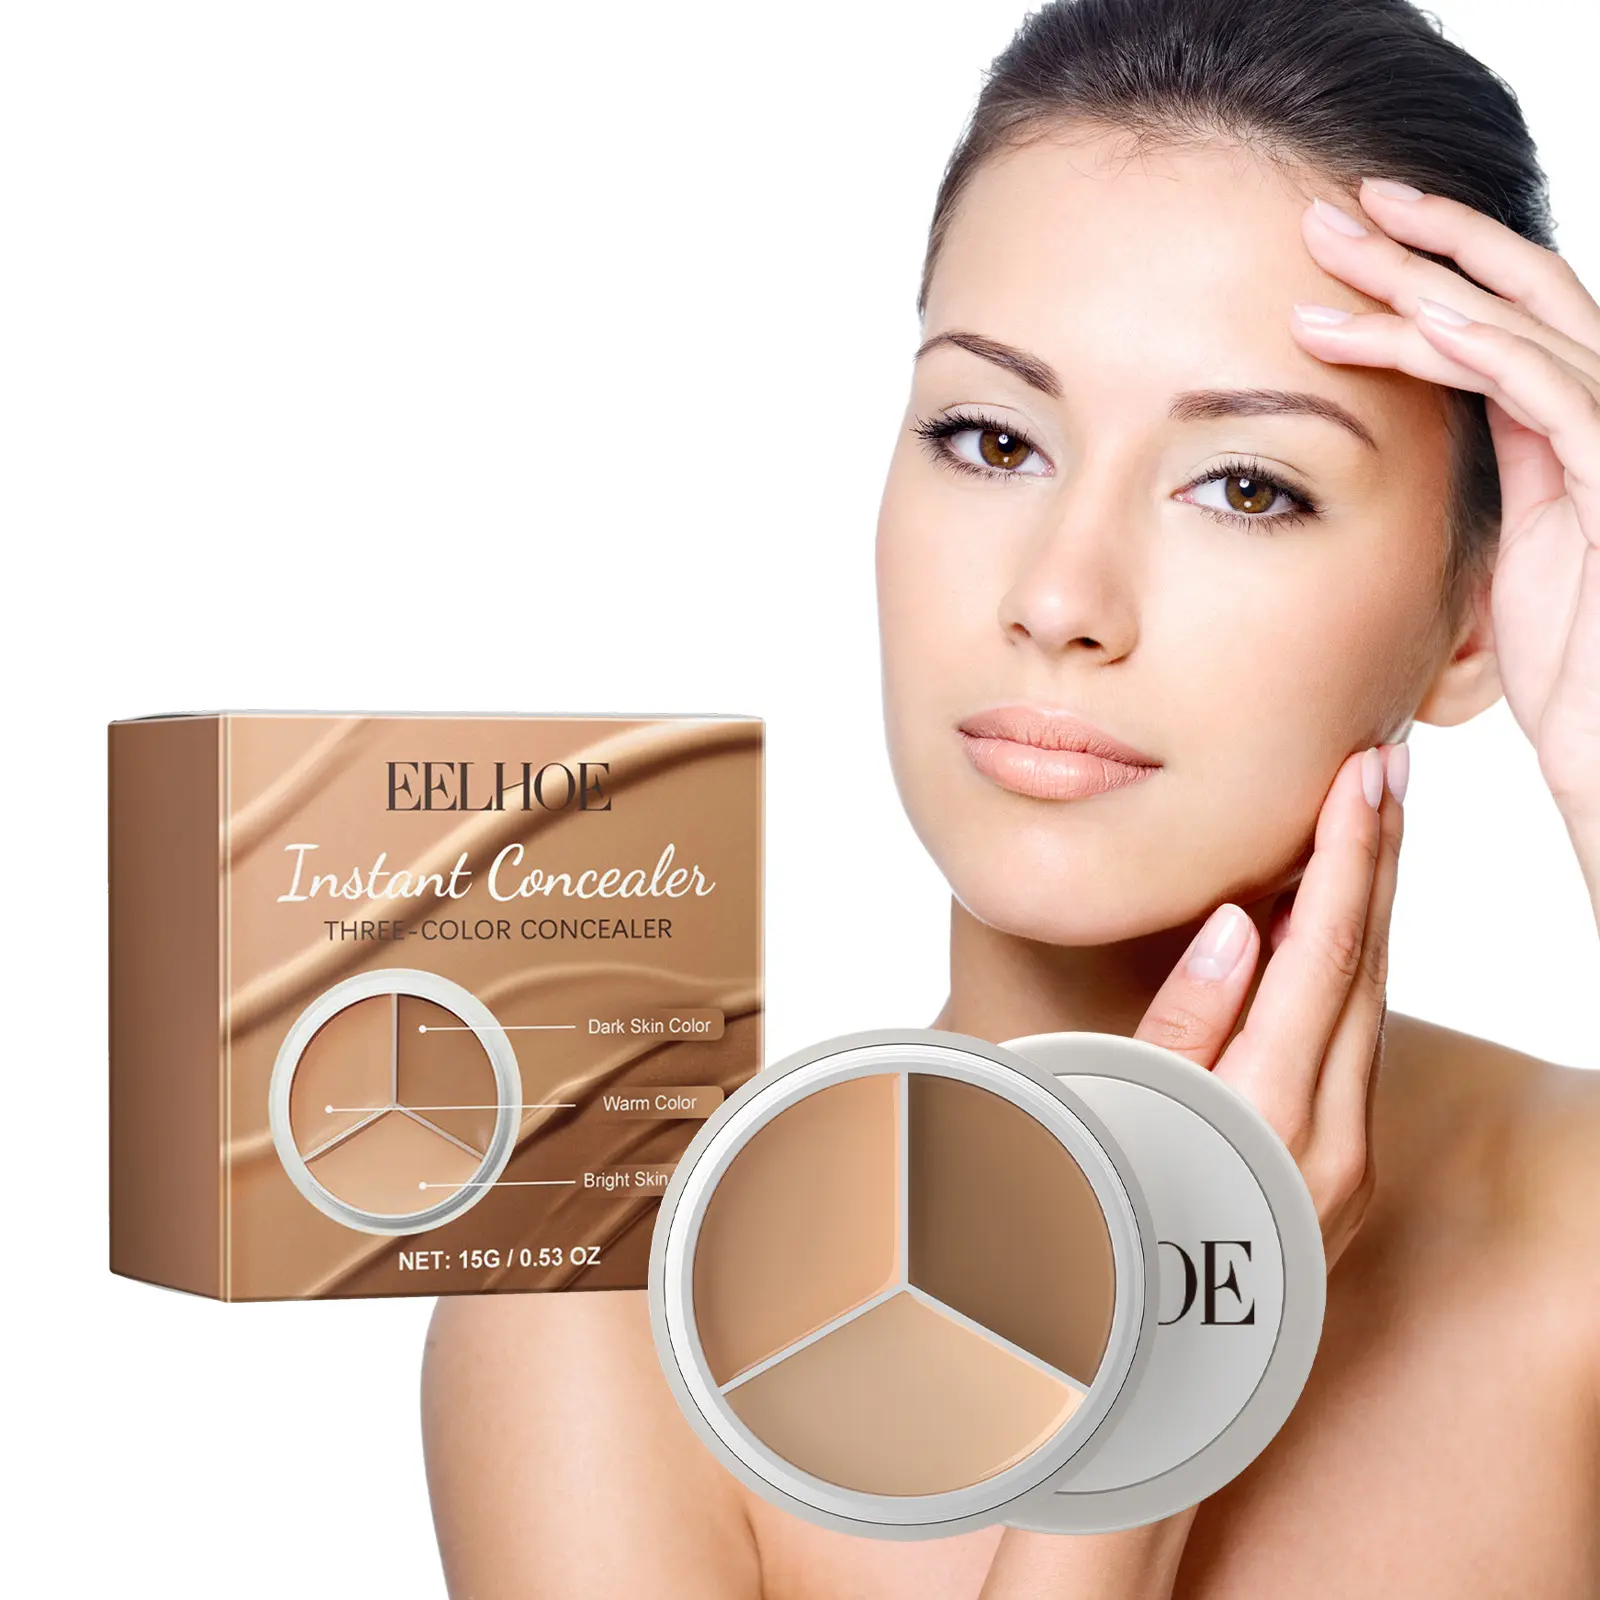 EELHOE hot sale covers facial blemishes and spots to create clear and natural makeup and cover concealer